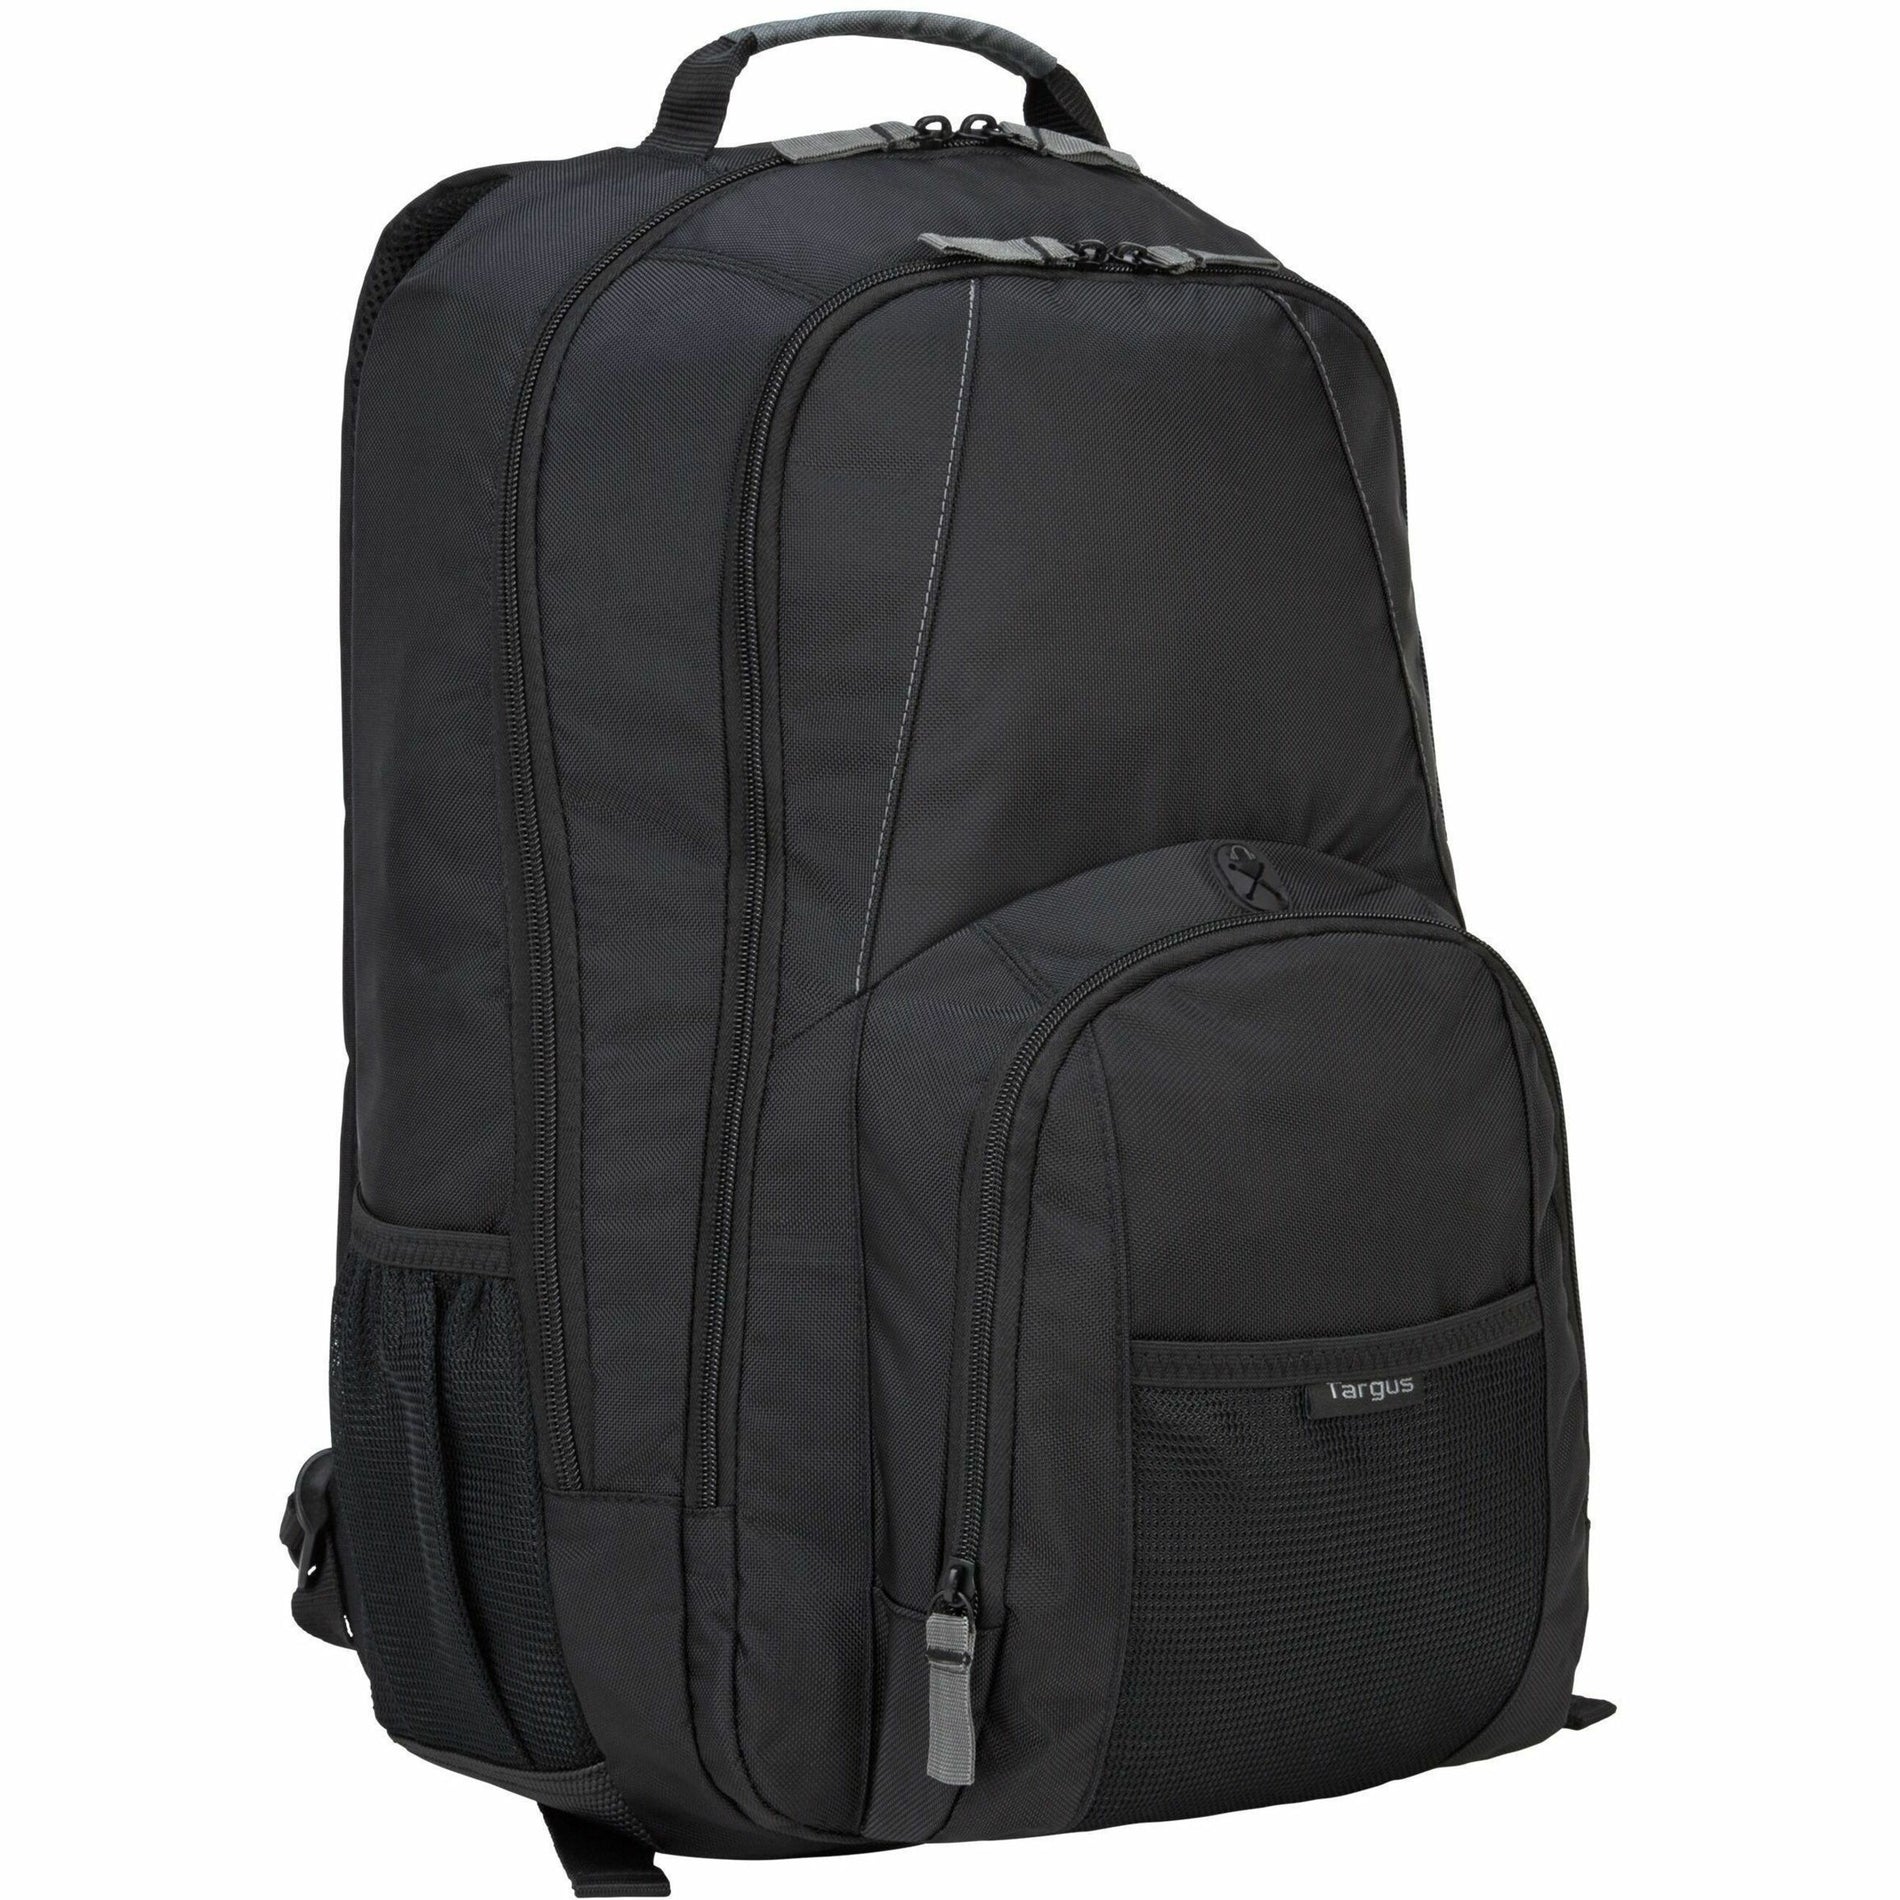 Targus CVR617 17" Groove Backpack, Black - Durable, Stylish, and Spacious Carrying Case